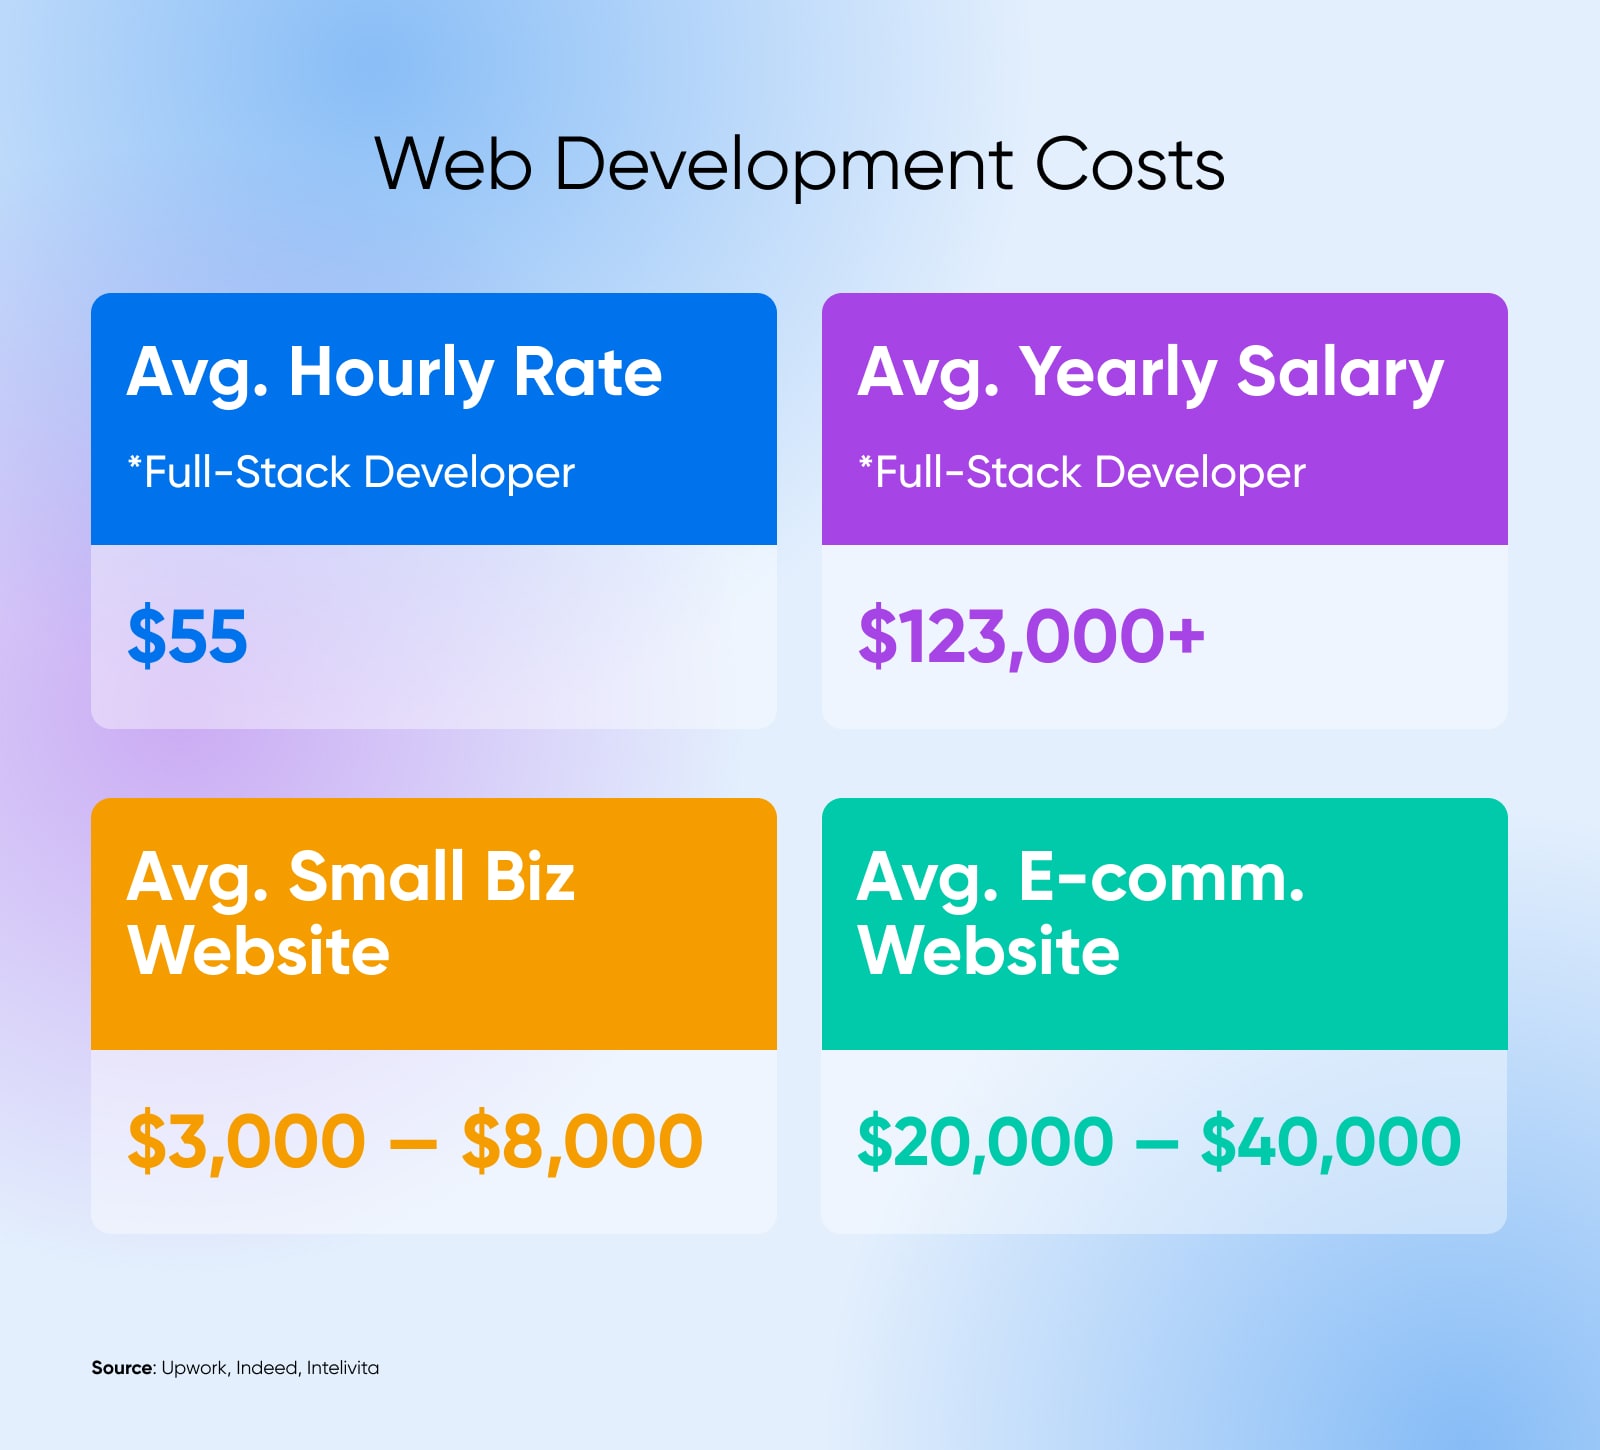 Web dev costs according to Upwork ($55 per hour), Indeed ($123,000 per year), and Intelivita ($3,000 to $40,000 per website).